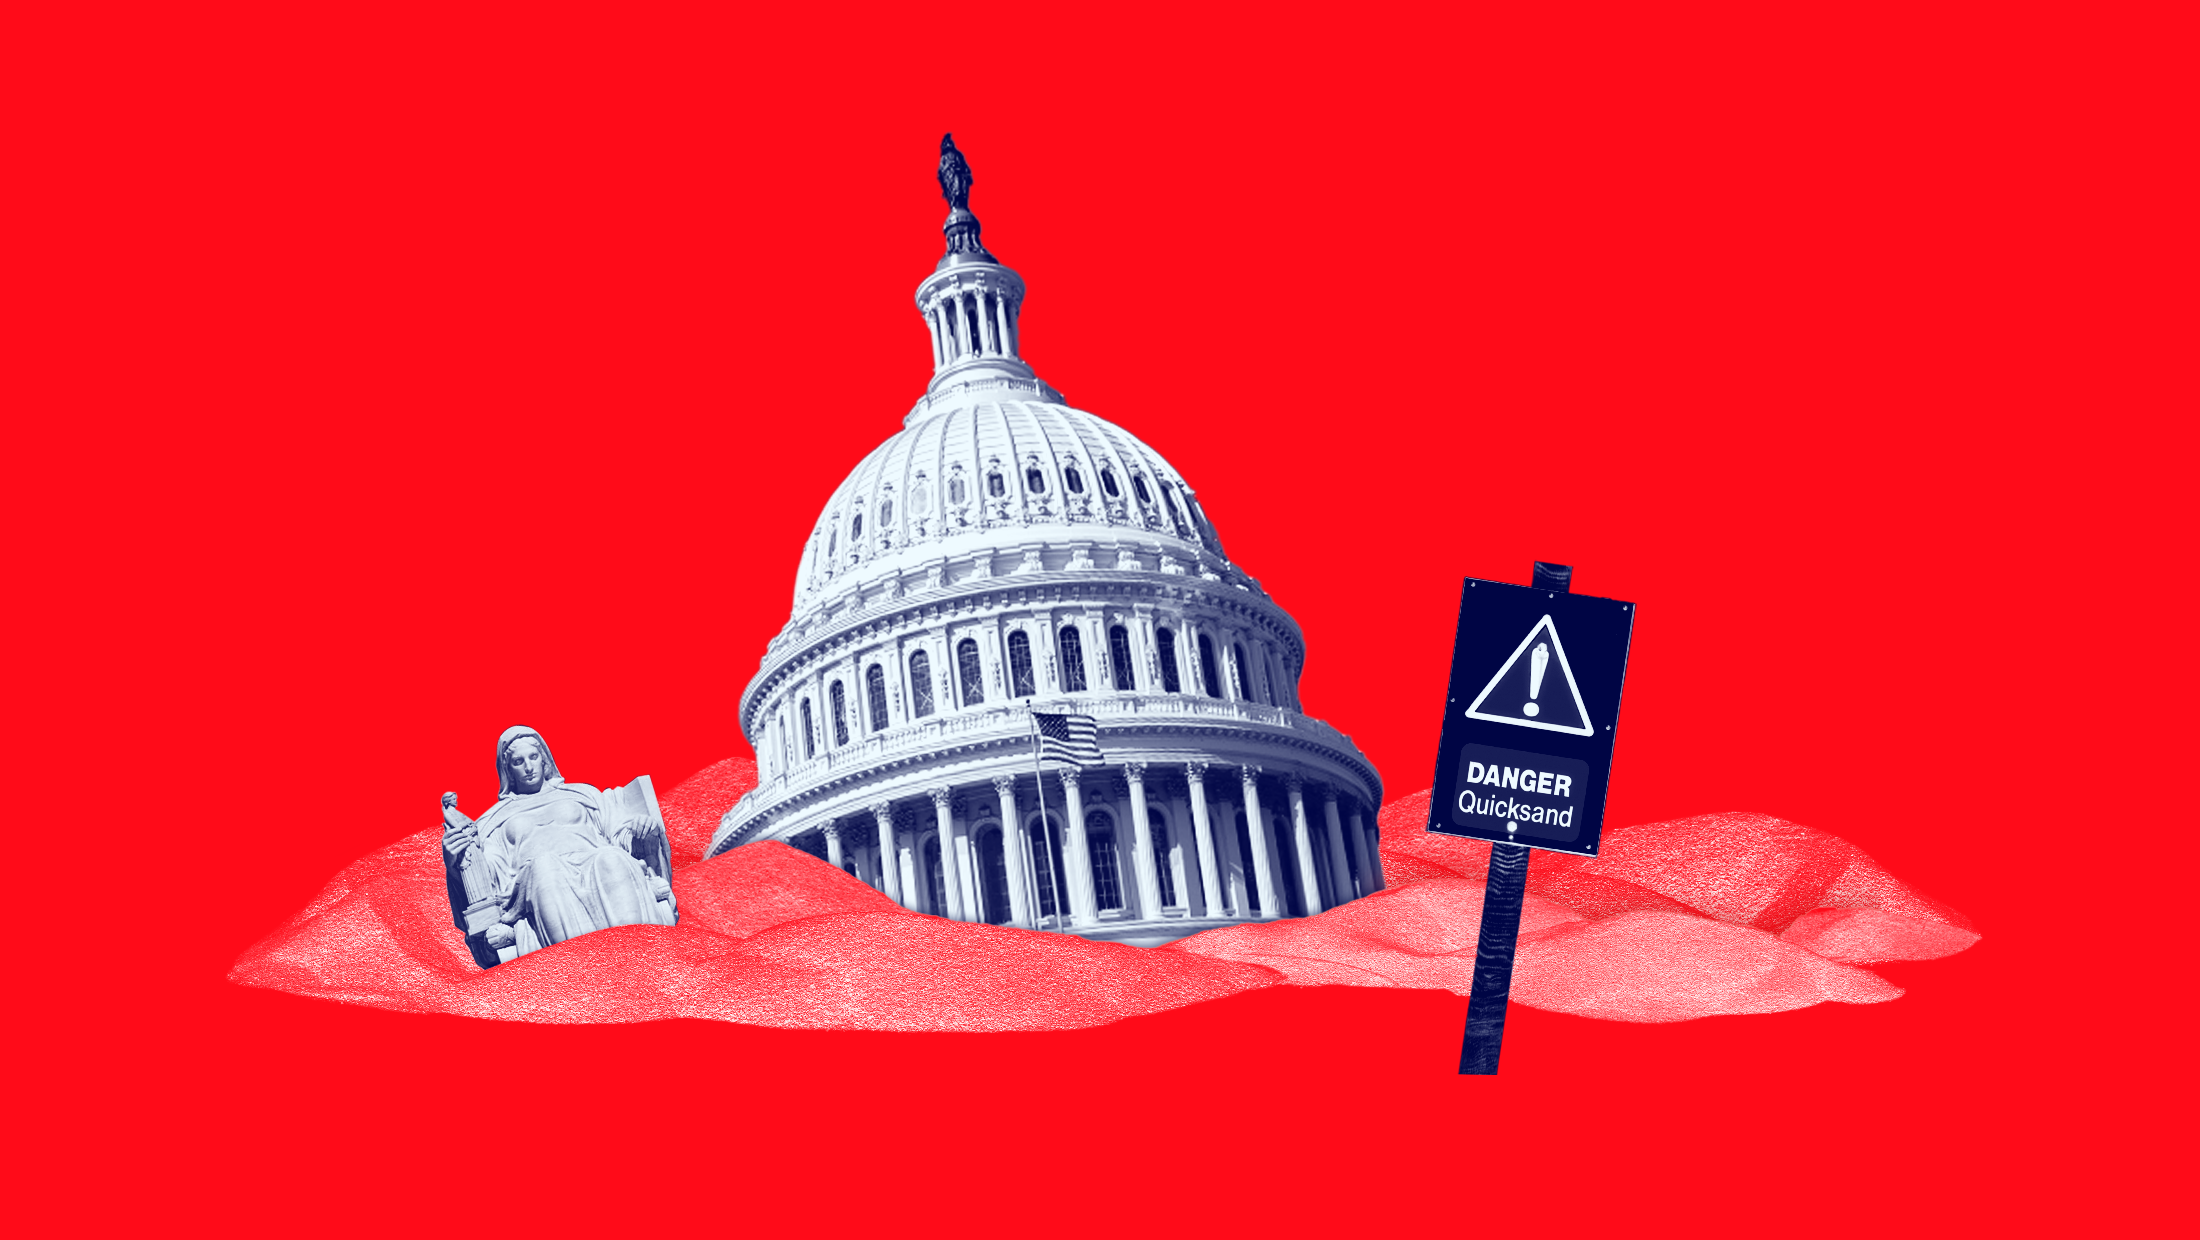 The U.S. Capitol and a statue from outside the U.S. Supreme Court sinking into a red pile of quickstand, accompanied by a warning sign that reads "DANGER QUICKSAND"